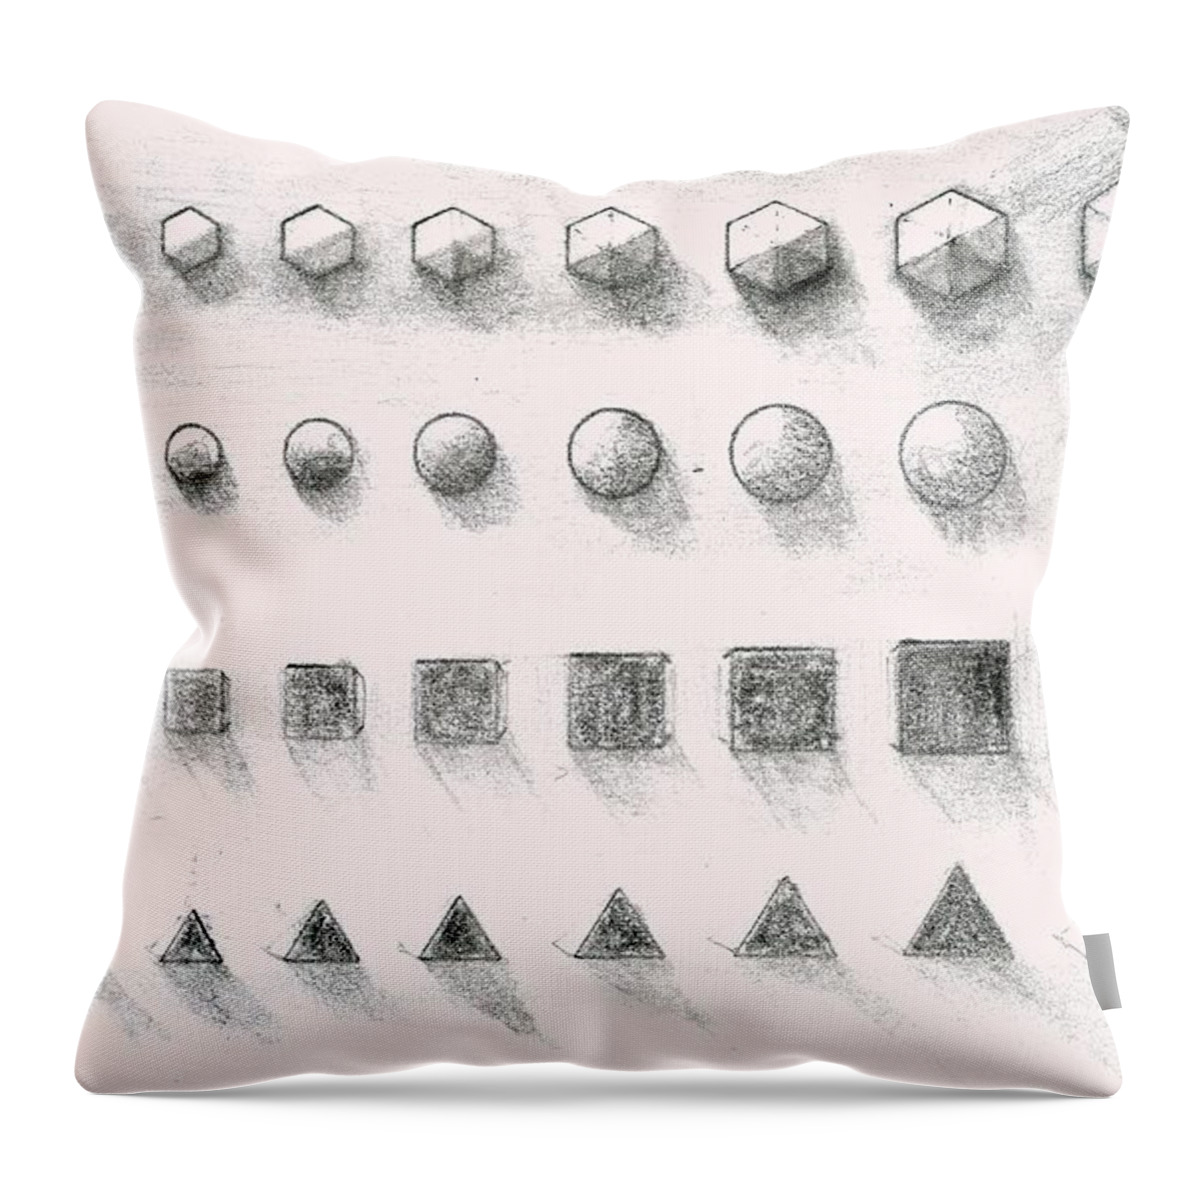  Throw Pillow featuring the drawing Template by James Lanigan Thompson MFA